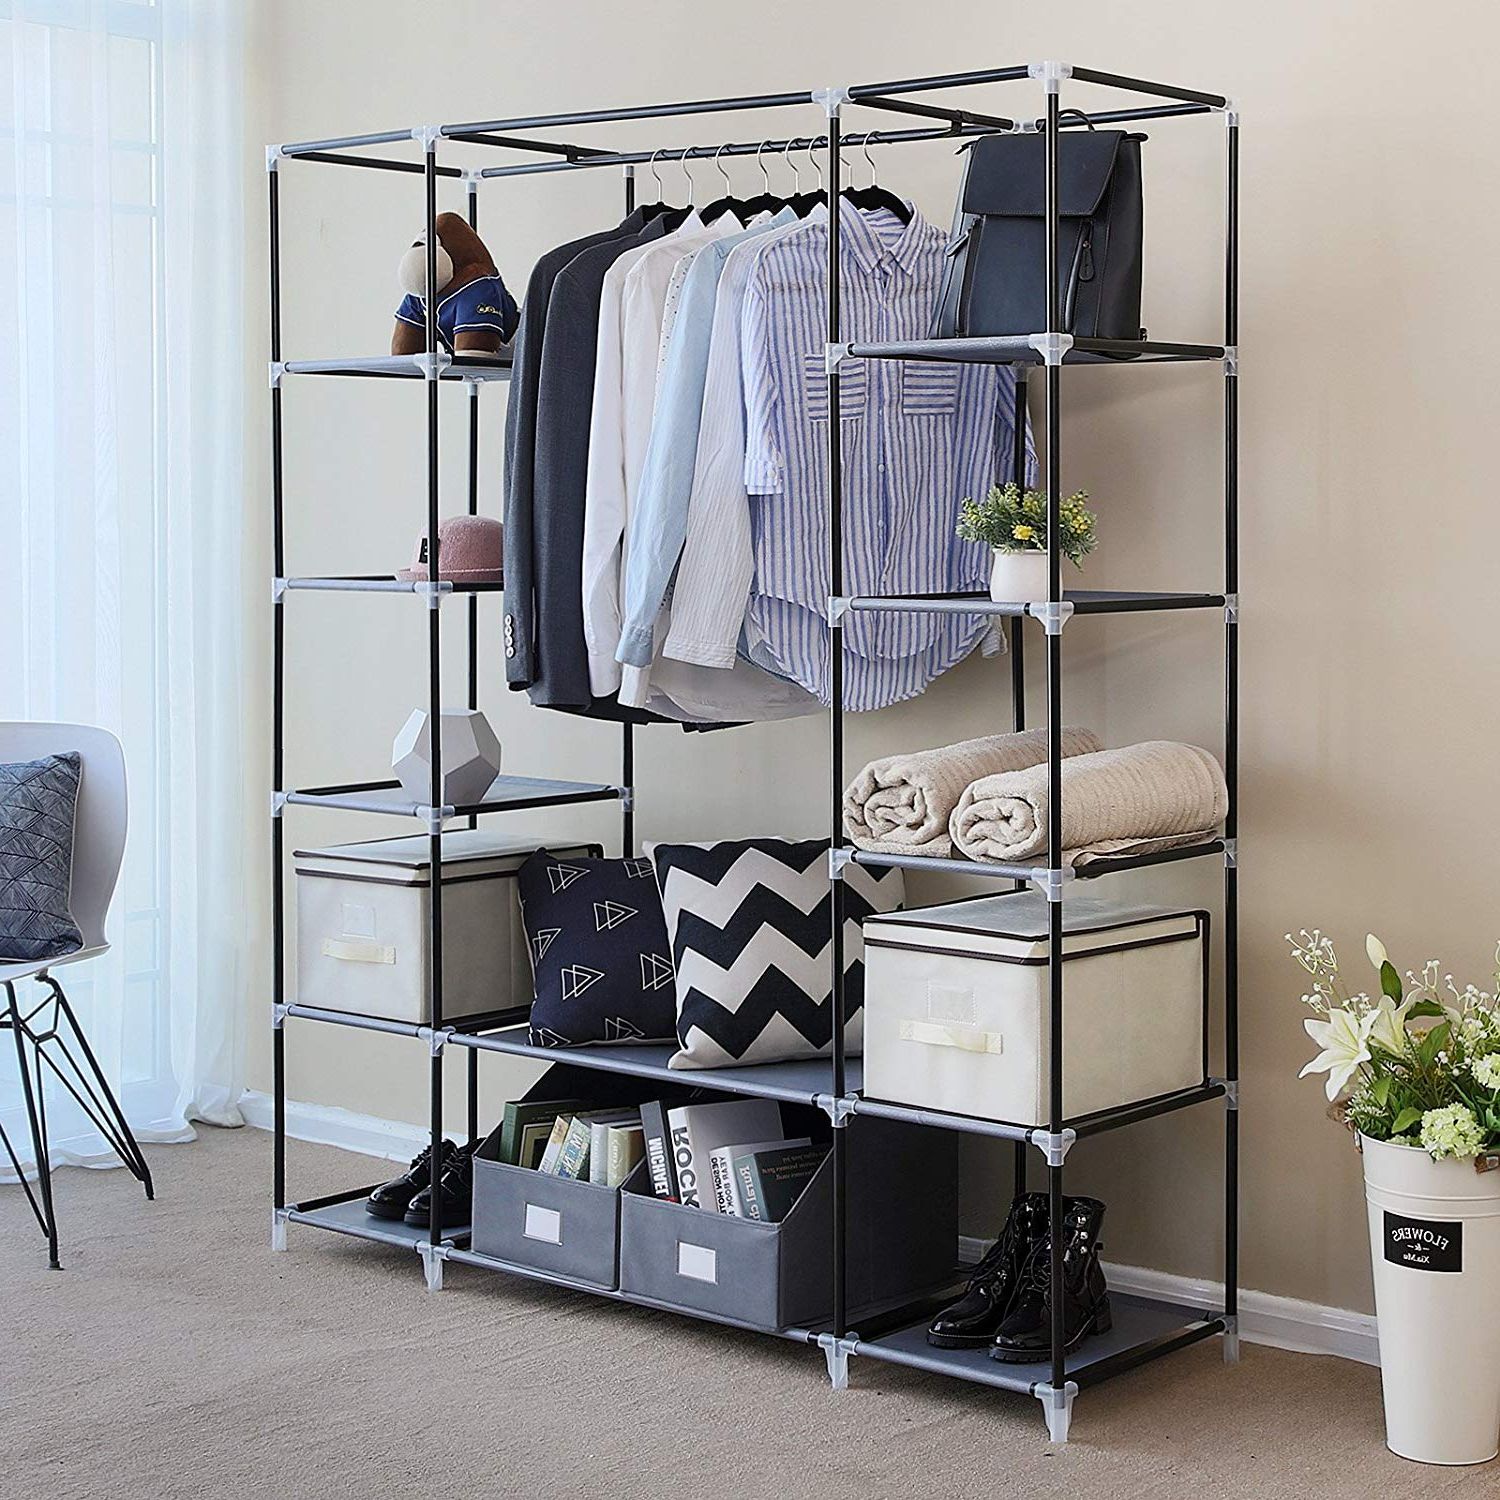 20 Portable Closet Choices For Easy Set Up And Cleaning | Storables Inside Portable Wardrobes (Gallery 14 of 20)